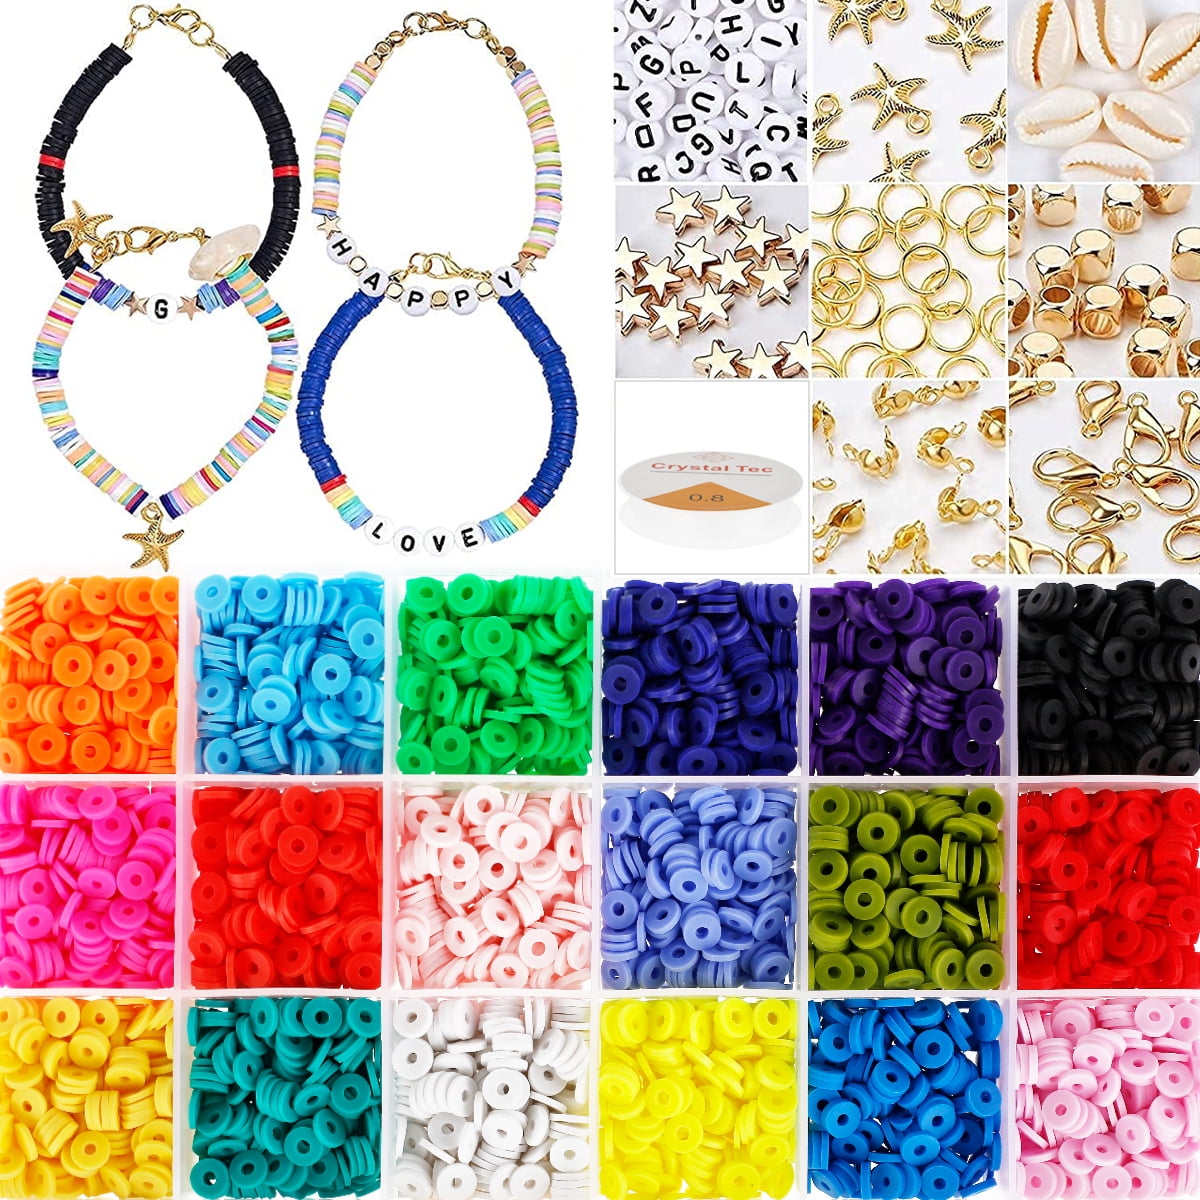 XTRAFUN 6000pcs Clay Beads Bracelet Kit - 24 Colors Flat Round Polymer Spacer Jewelry Making Include Pendant Charms Elastic String Necklace Heishi Letter